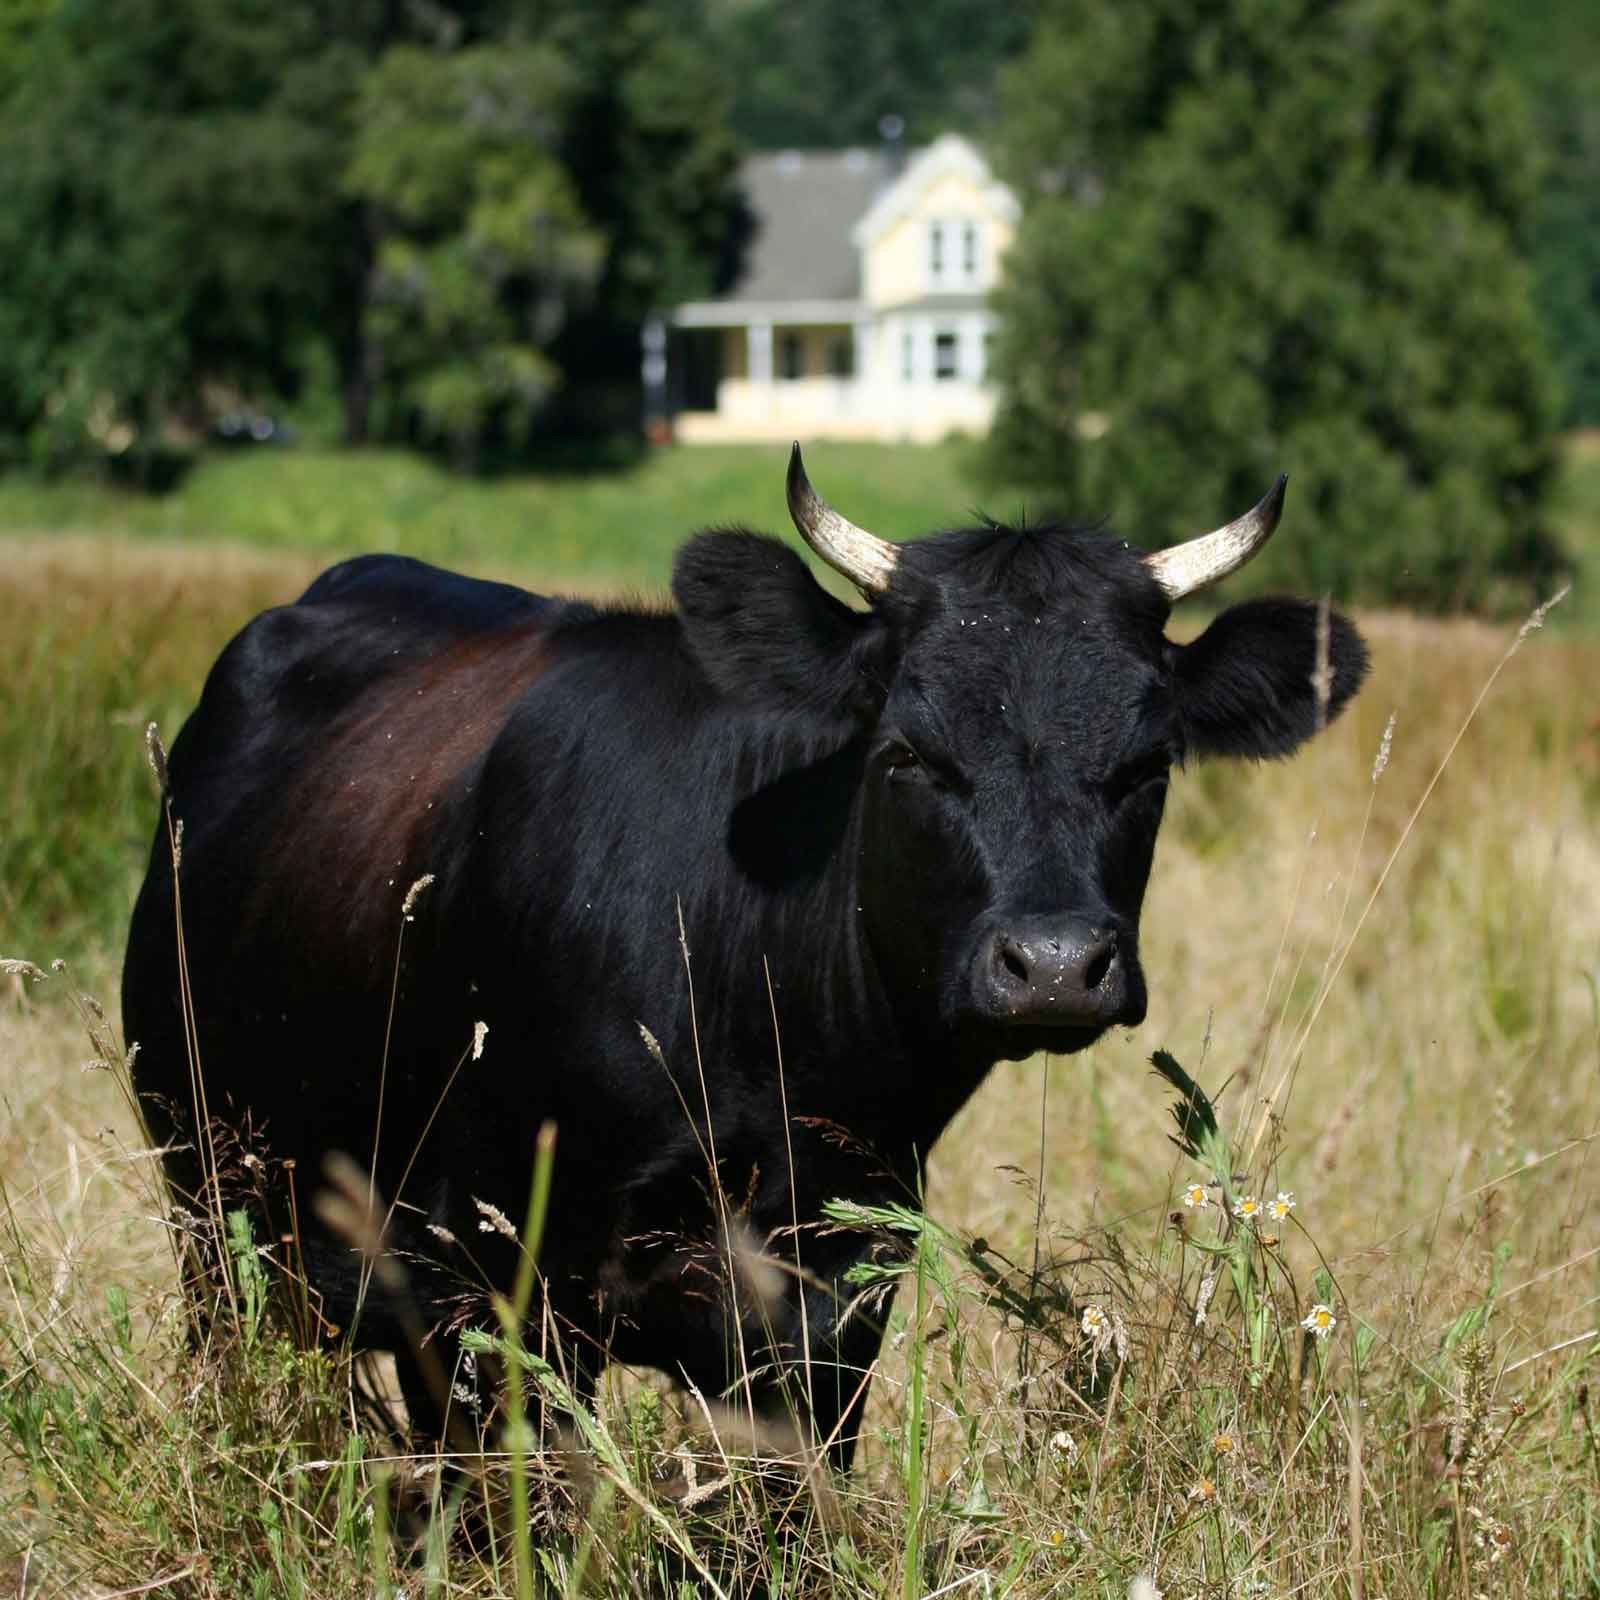  Big Table Farm – A cow in the field. 